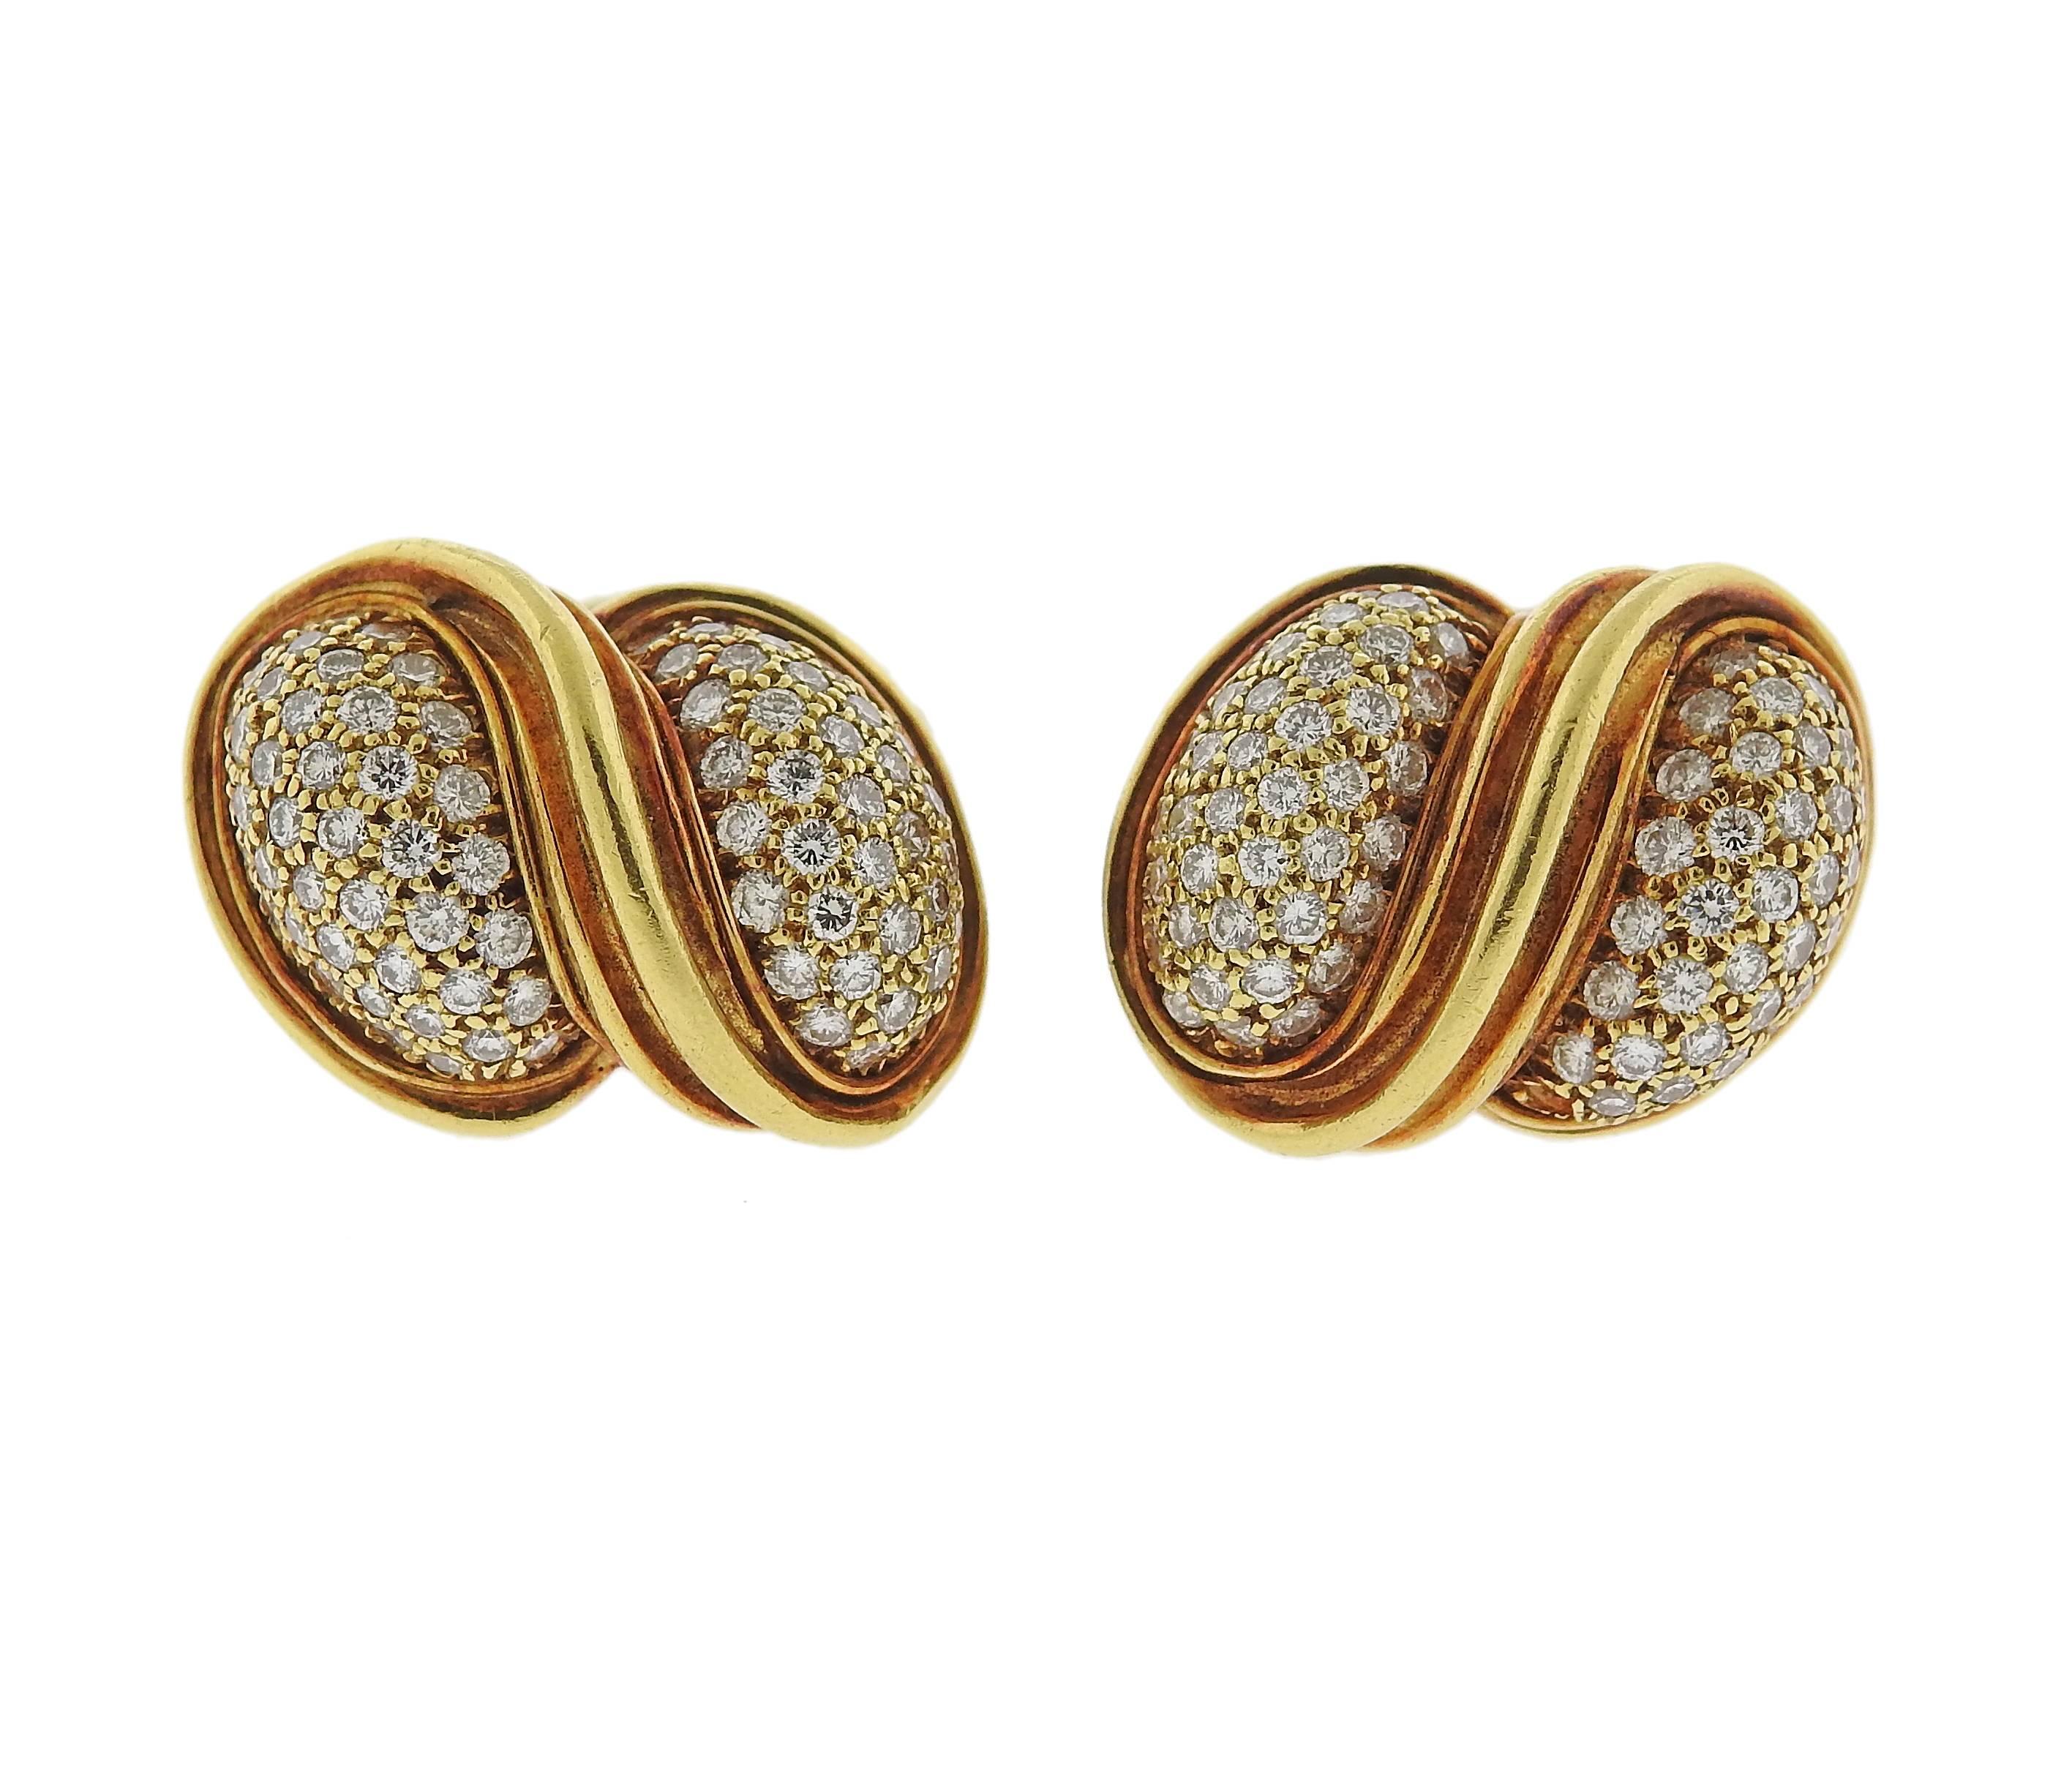 Pair of 18k yellow gold cufflinks, crafted by Henry Dunay, set with approximately 0.40ctw in diamonds.  Cufflink top measures 20mm x 13mm. Marked: Dunay 18k. Weight - 22.6 grams.  